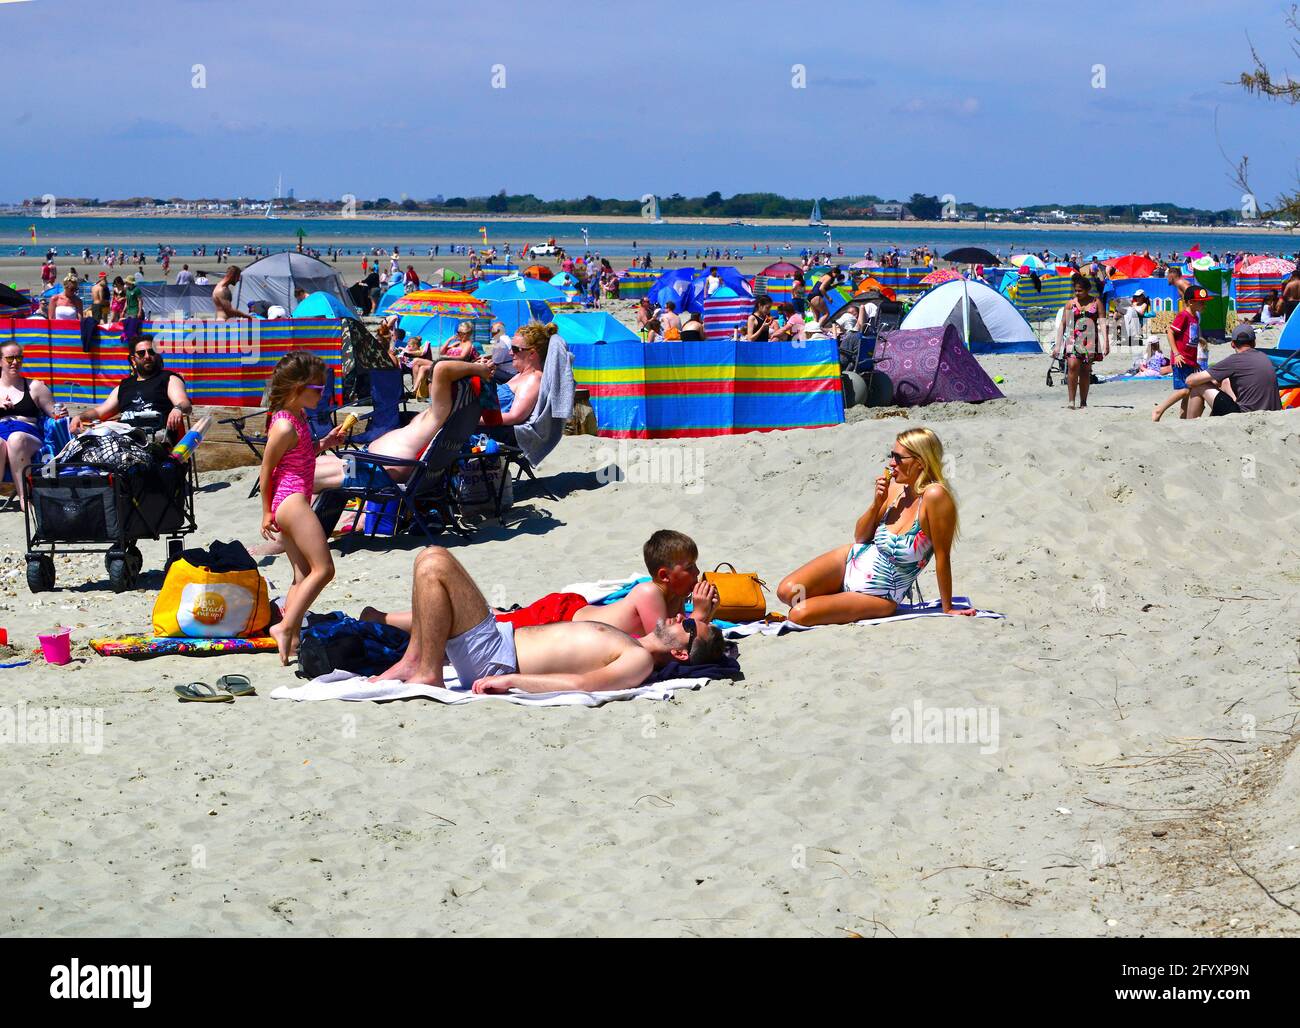 Fantastic May Bank holiday weather on West Wittering beach, West Sussex, England, UK Credit: Gary Blake Alamy Live News Stock Photo